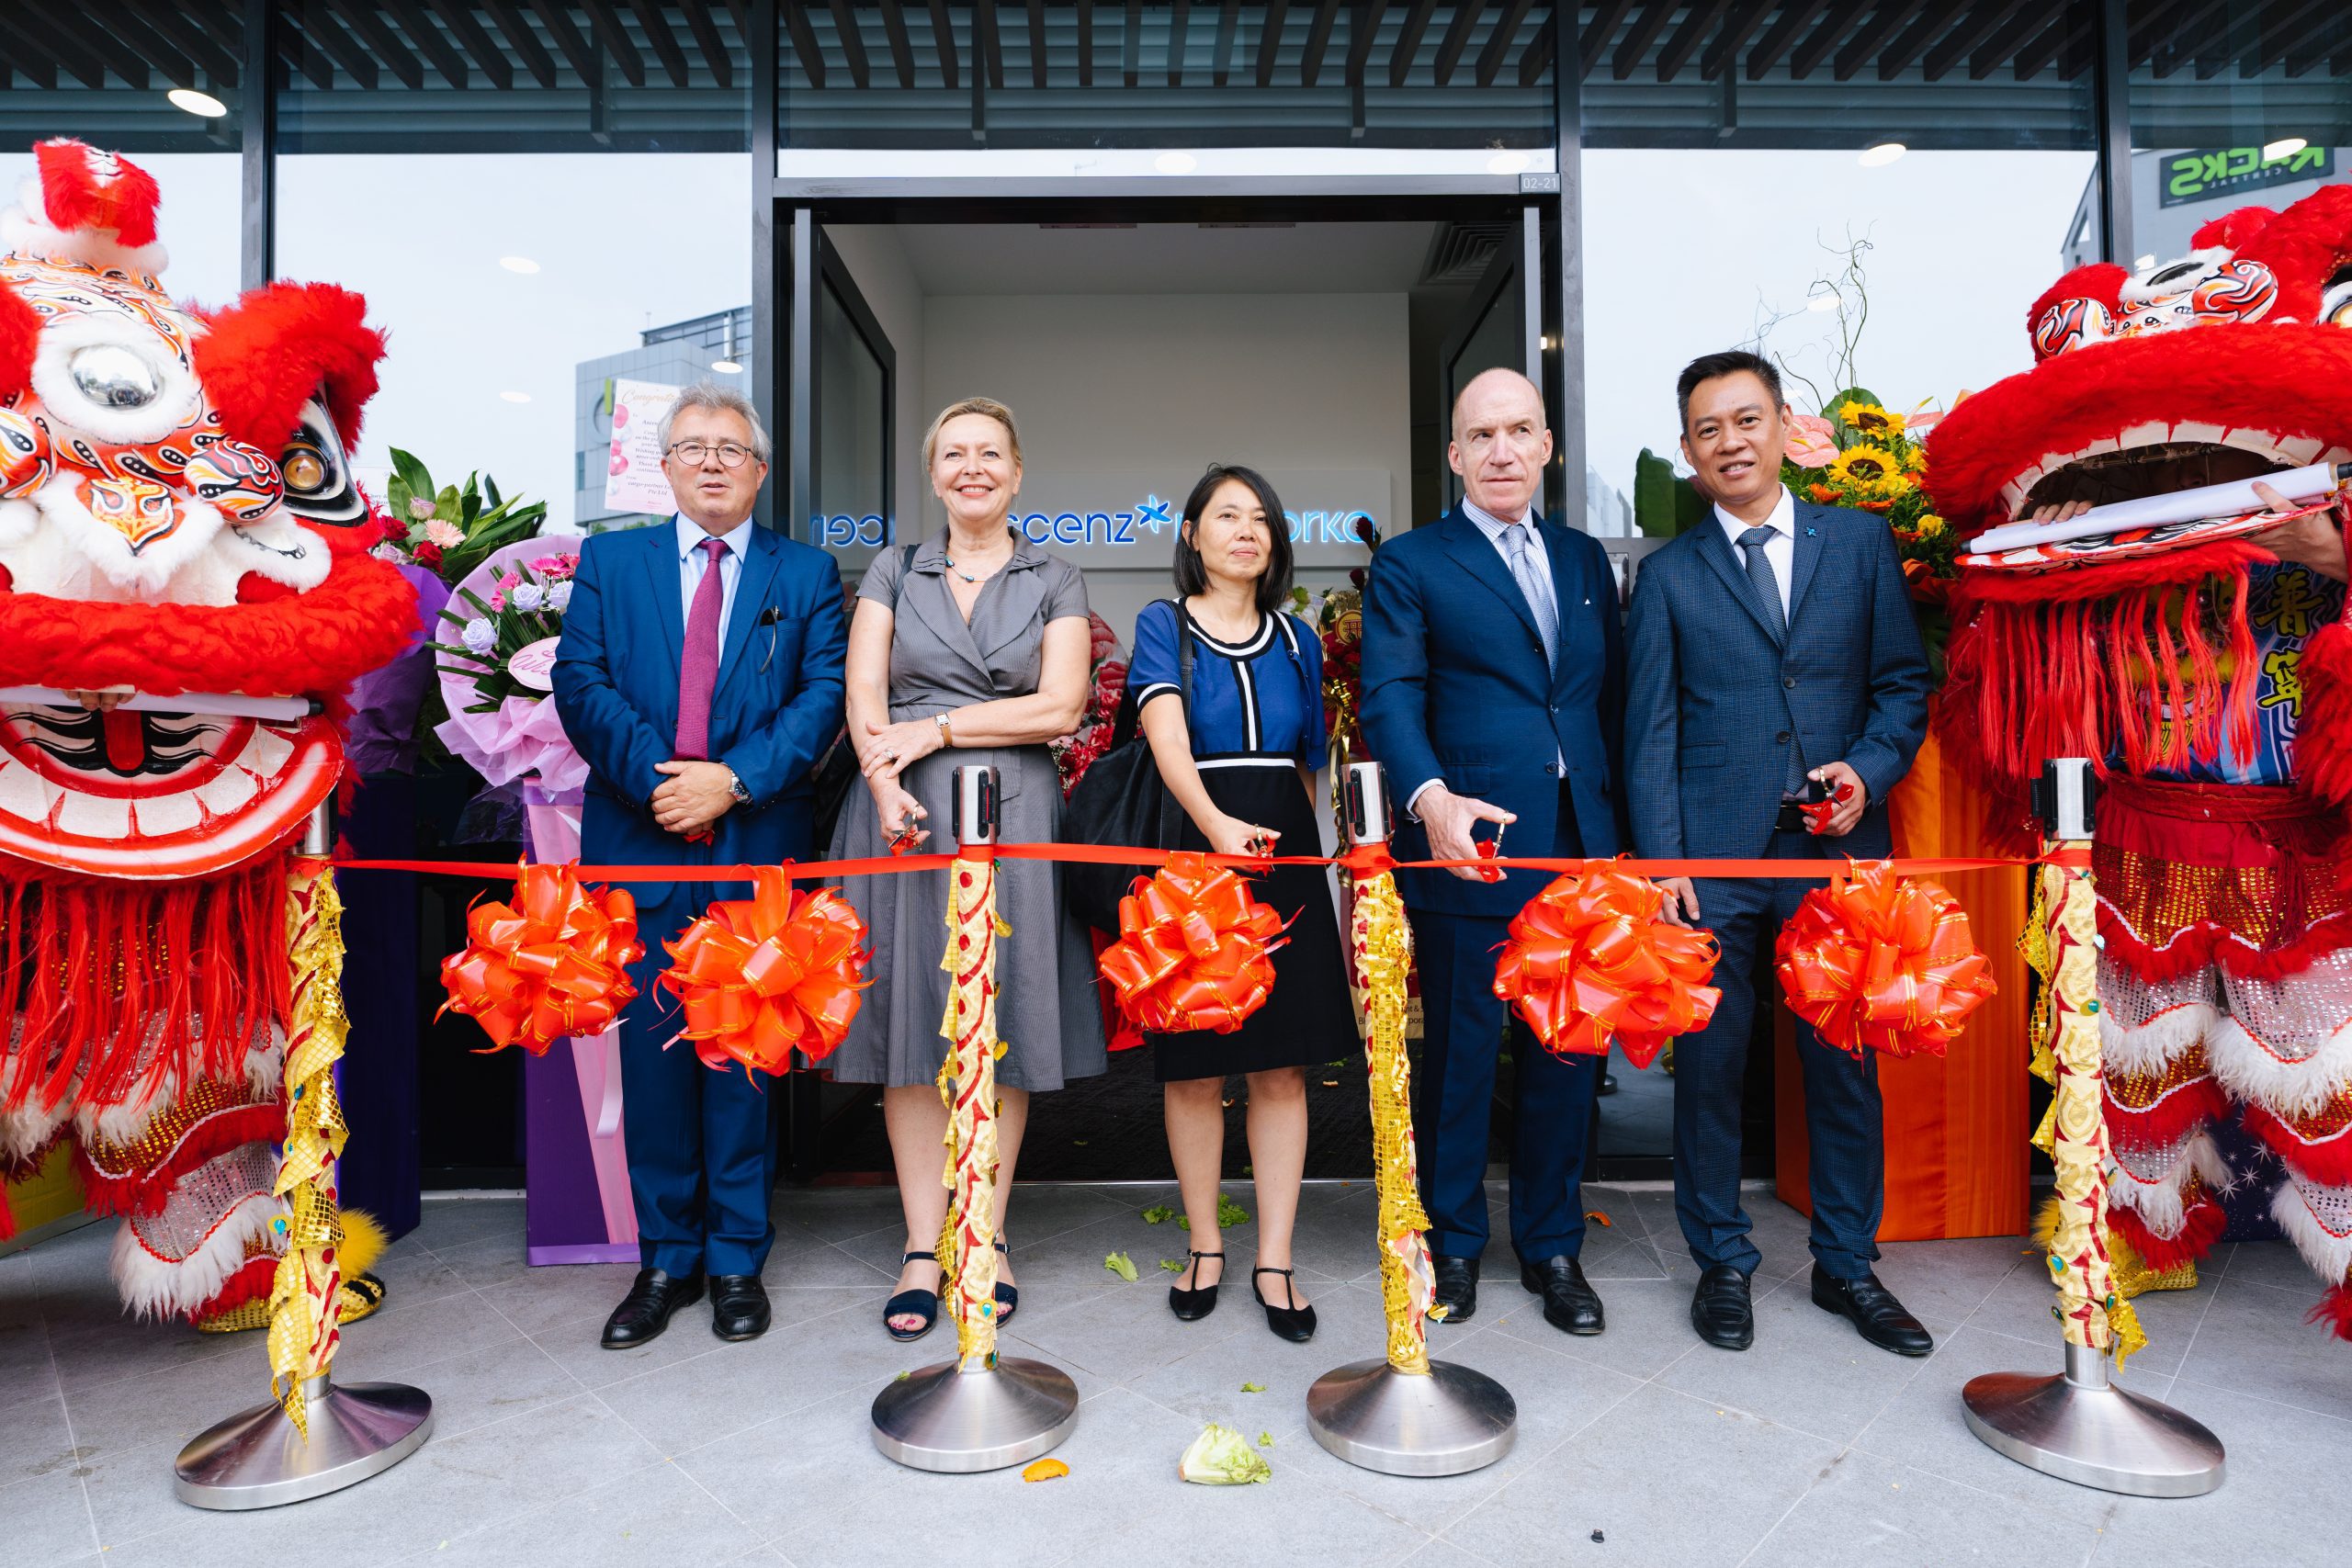 Singapore office grand opening - Ascenz Marorka